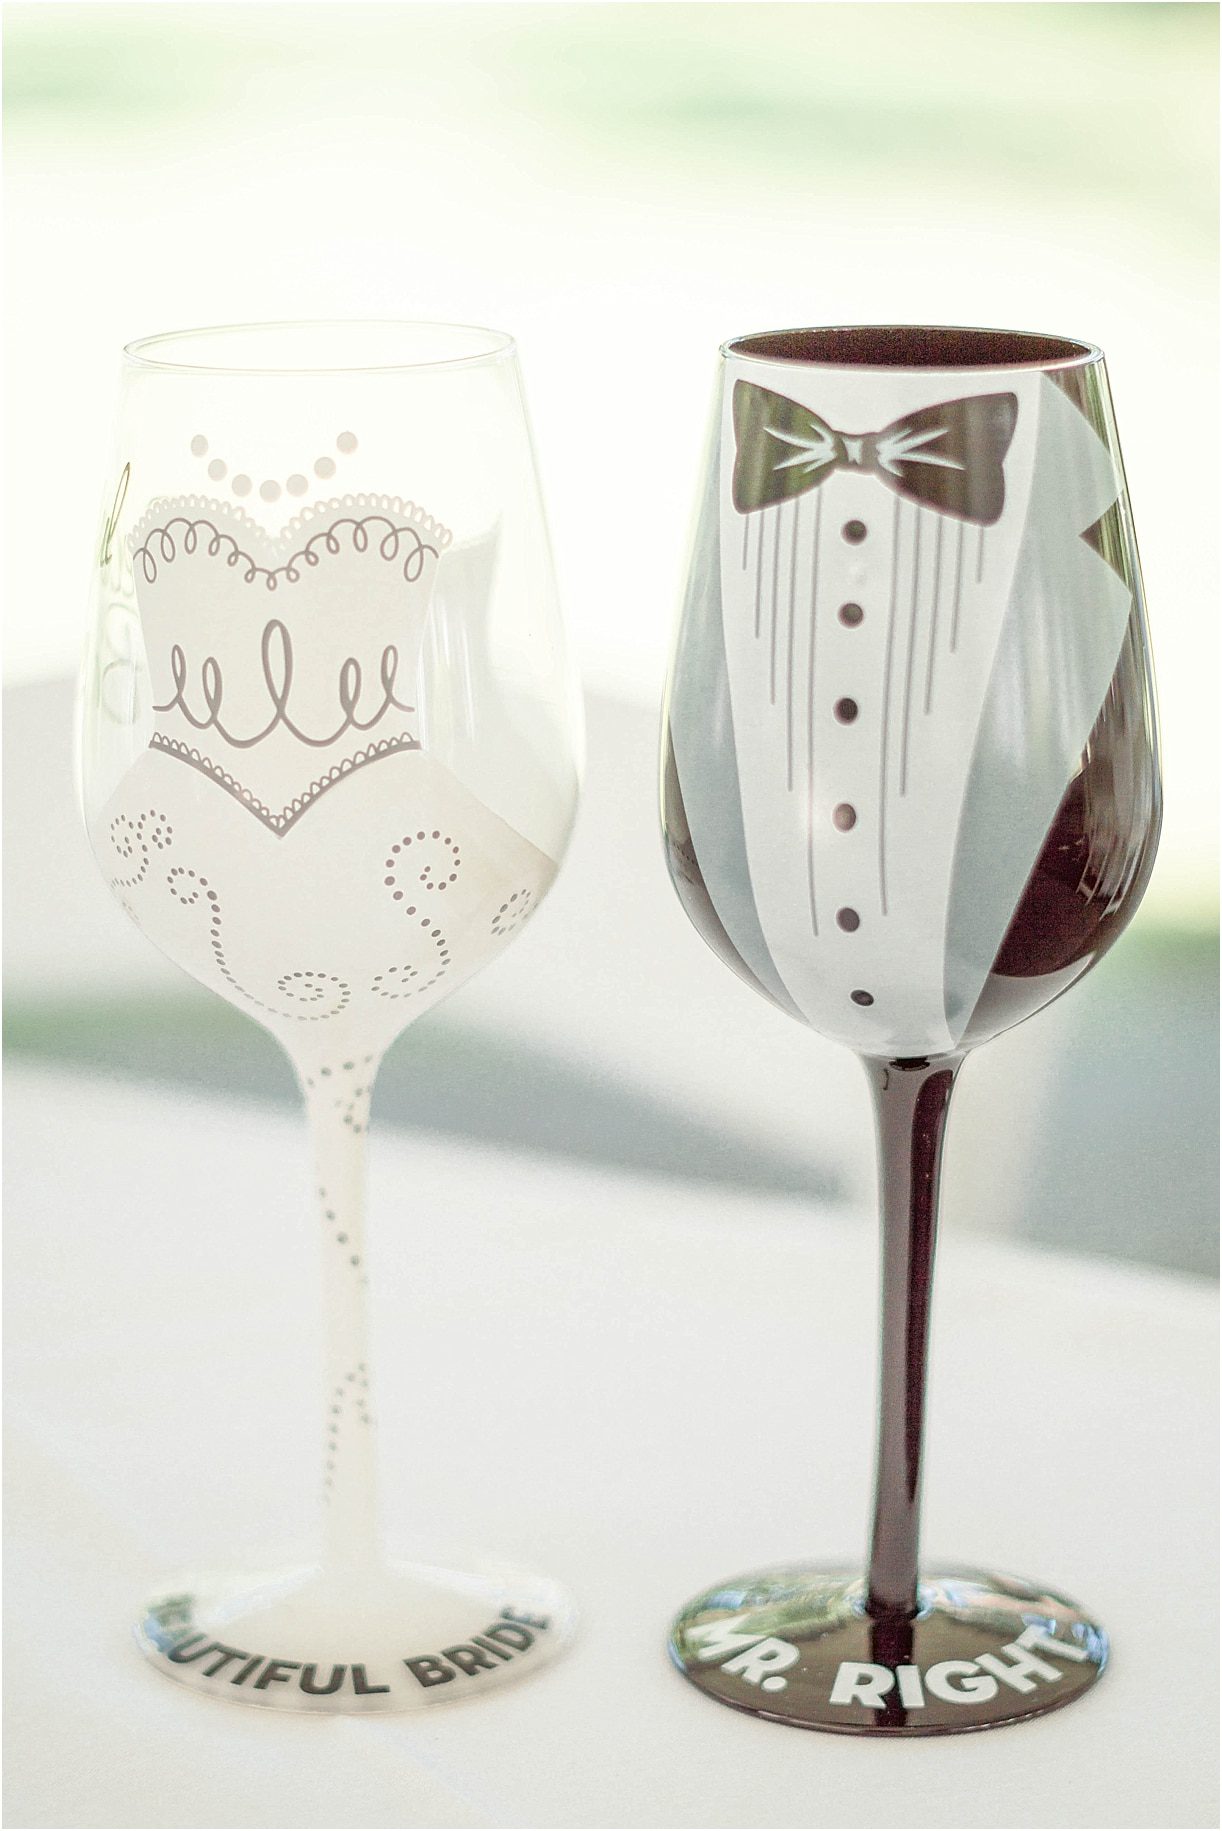 Interracial Lavender Richmond Virginia Wedding as seen on Hill City Bride Blog by Demi Mabry Photography personalized painted wine glasses